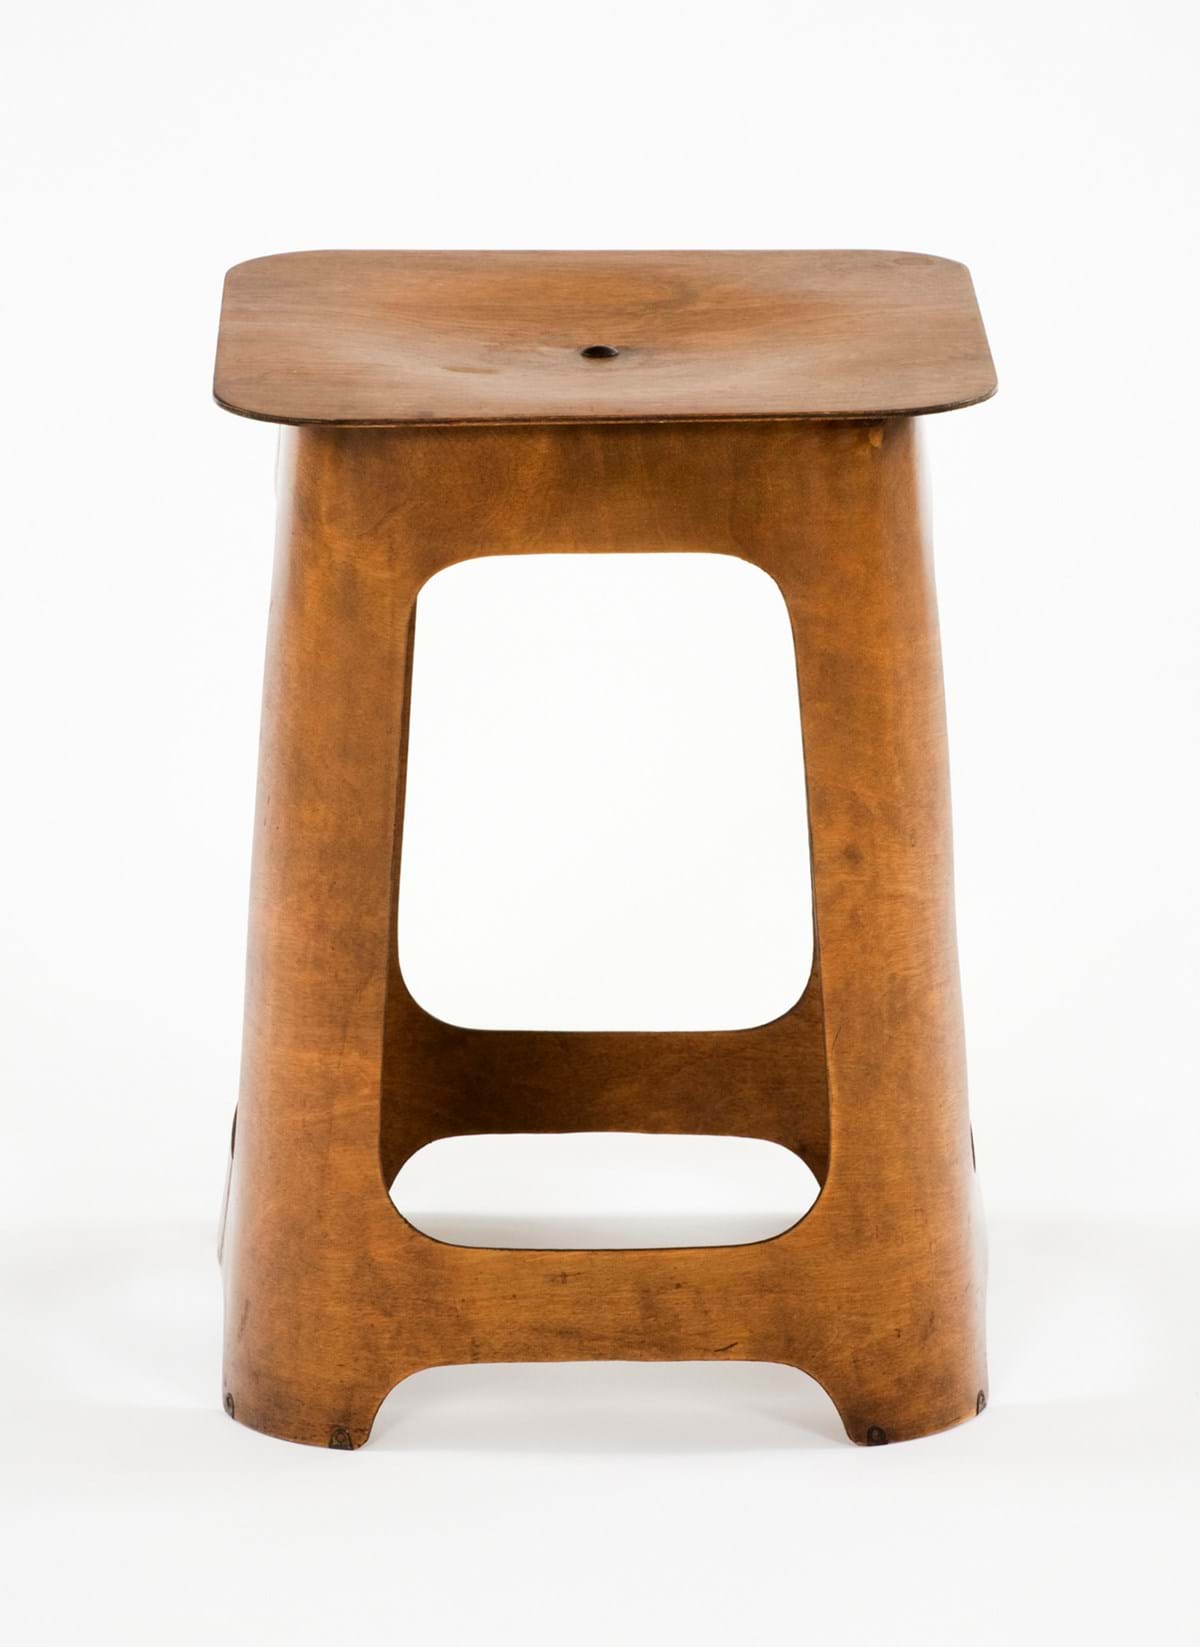 A brown plywood stool